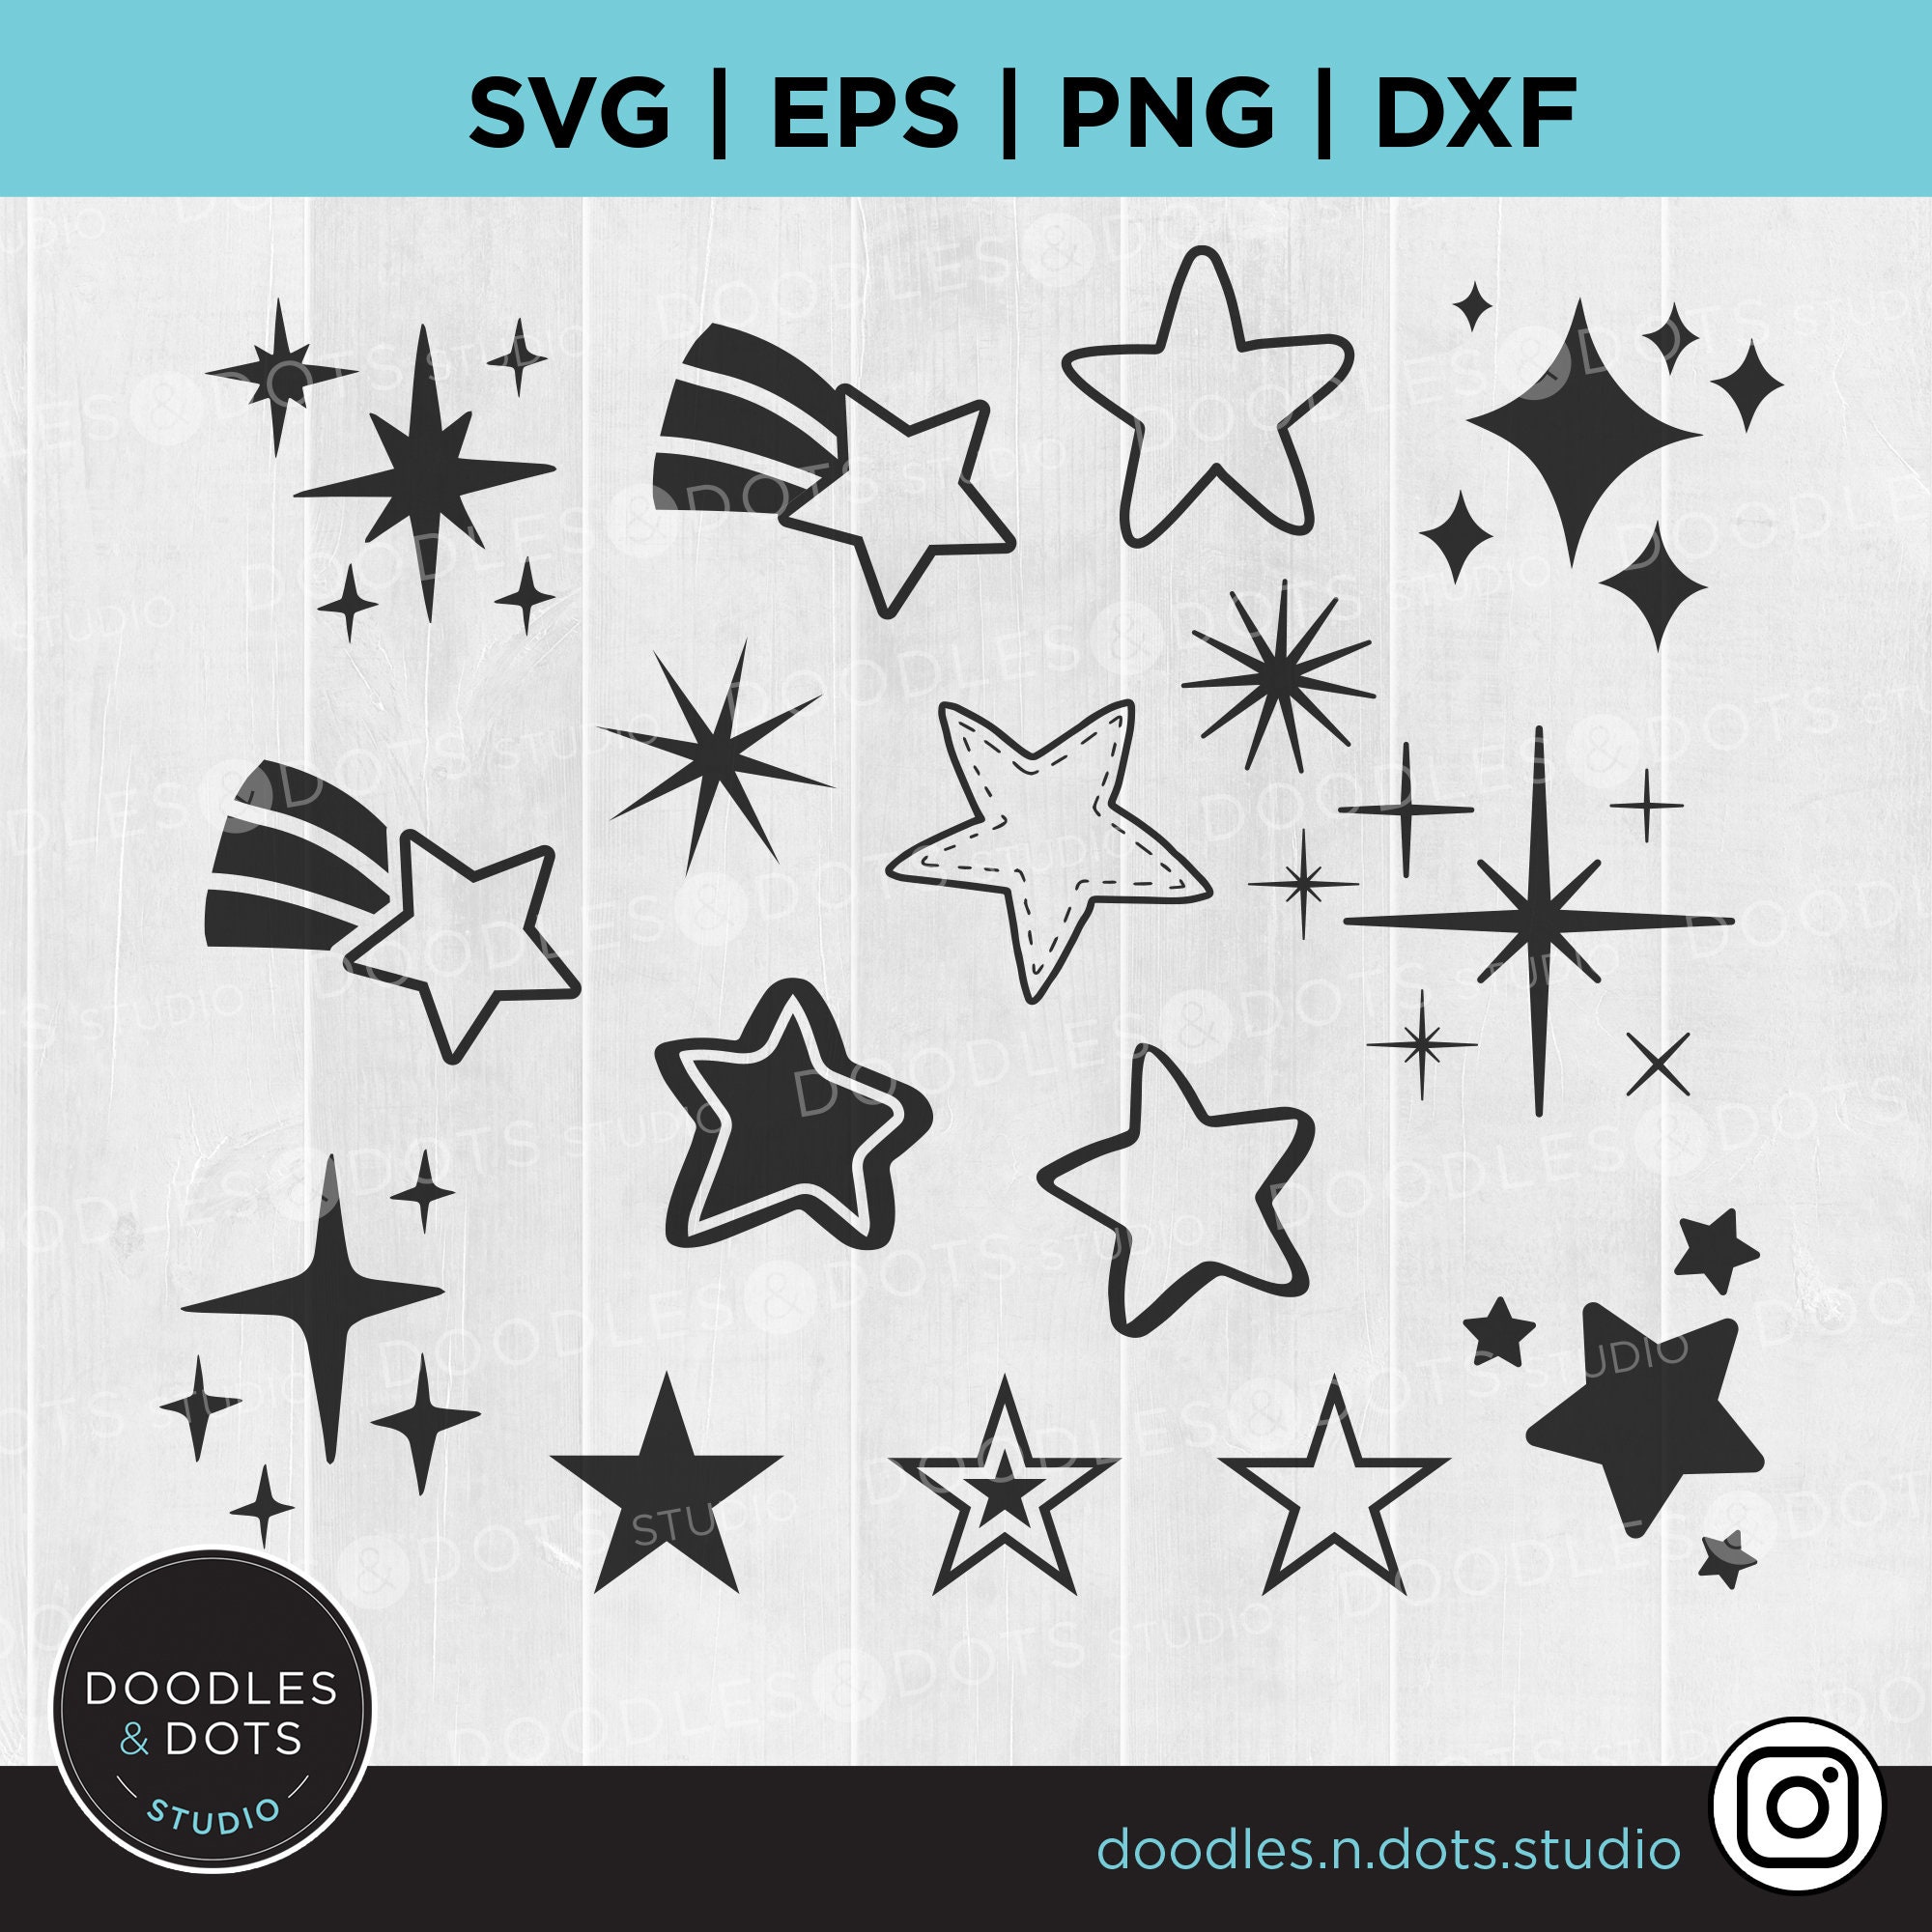 Design Elements SVG Embellishments Bundle SVG Decorative Add Ons Squiggles,  Lines, Flourishes, Stars, Hearts, Arrows, Hand Drawn Svgs -  Israel